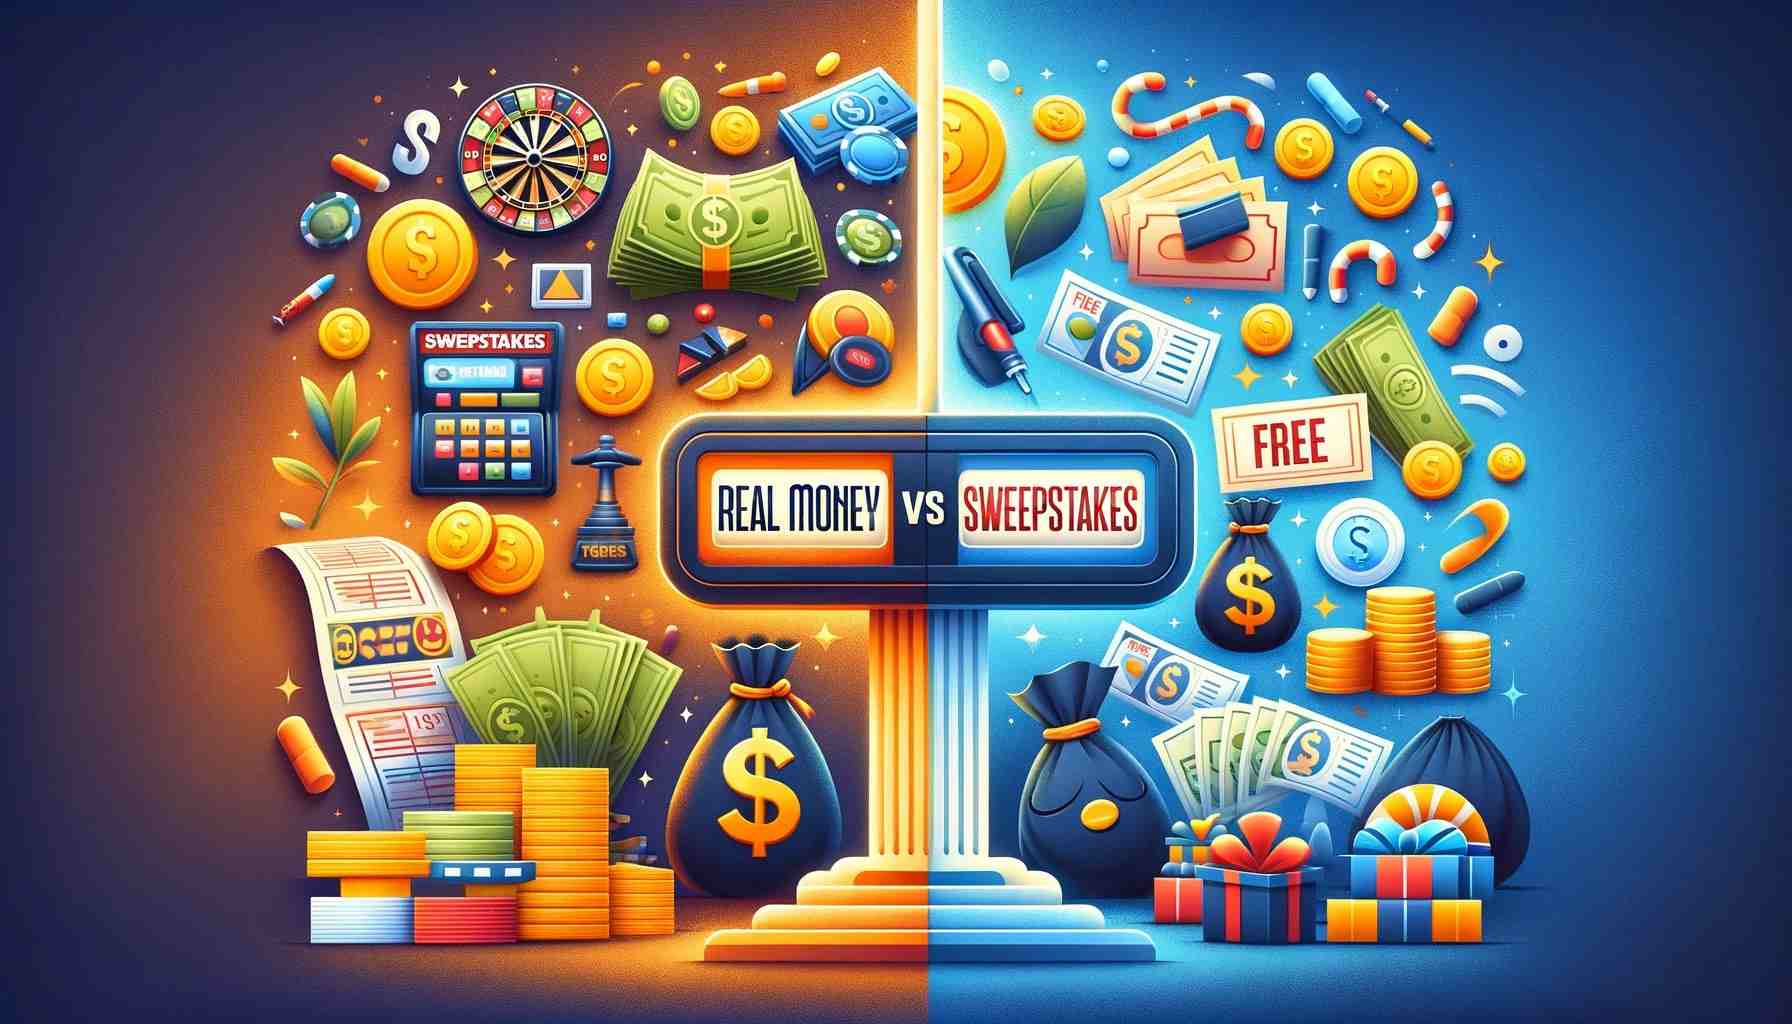 Real Money vs Sweepstakes